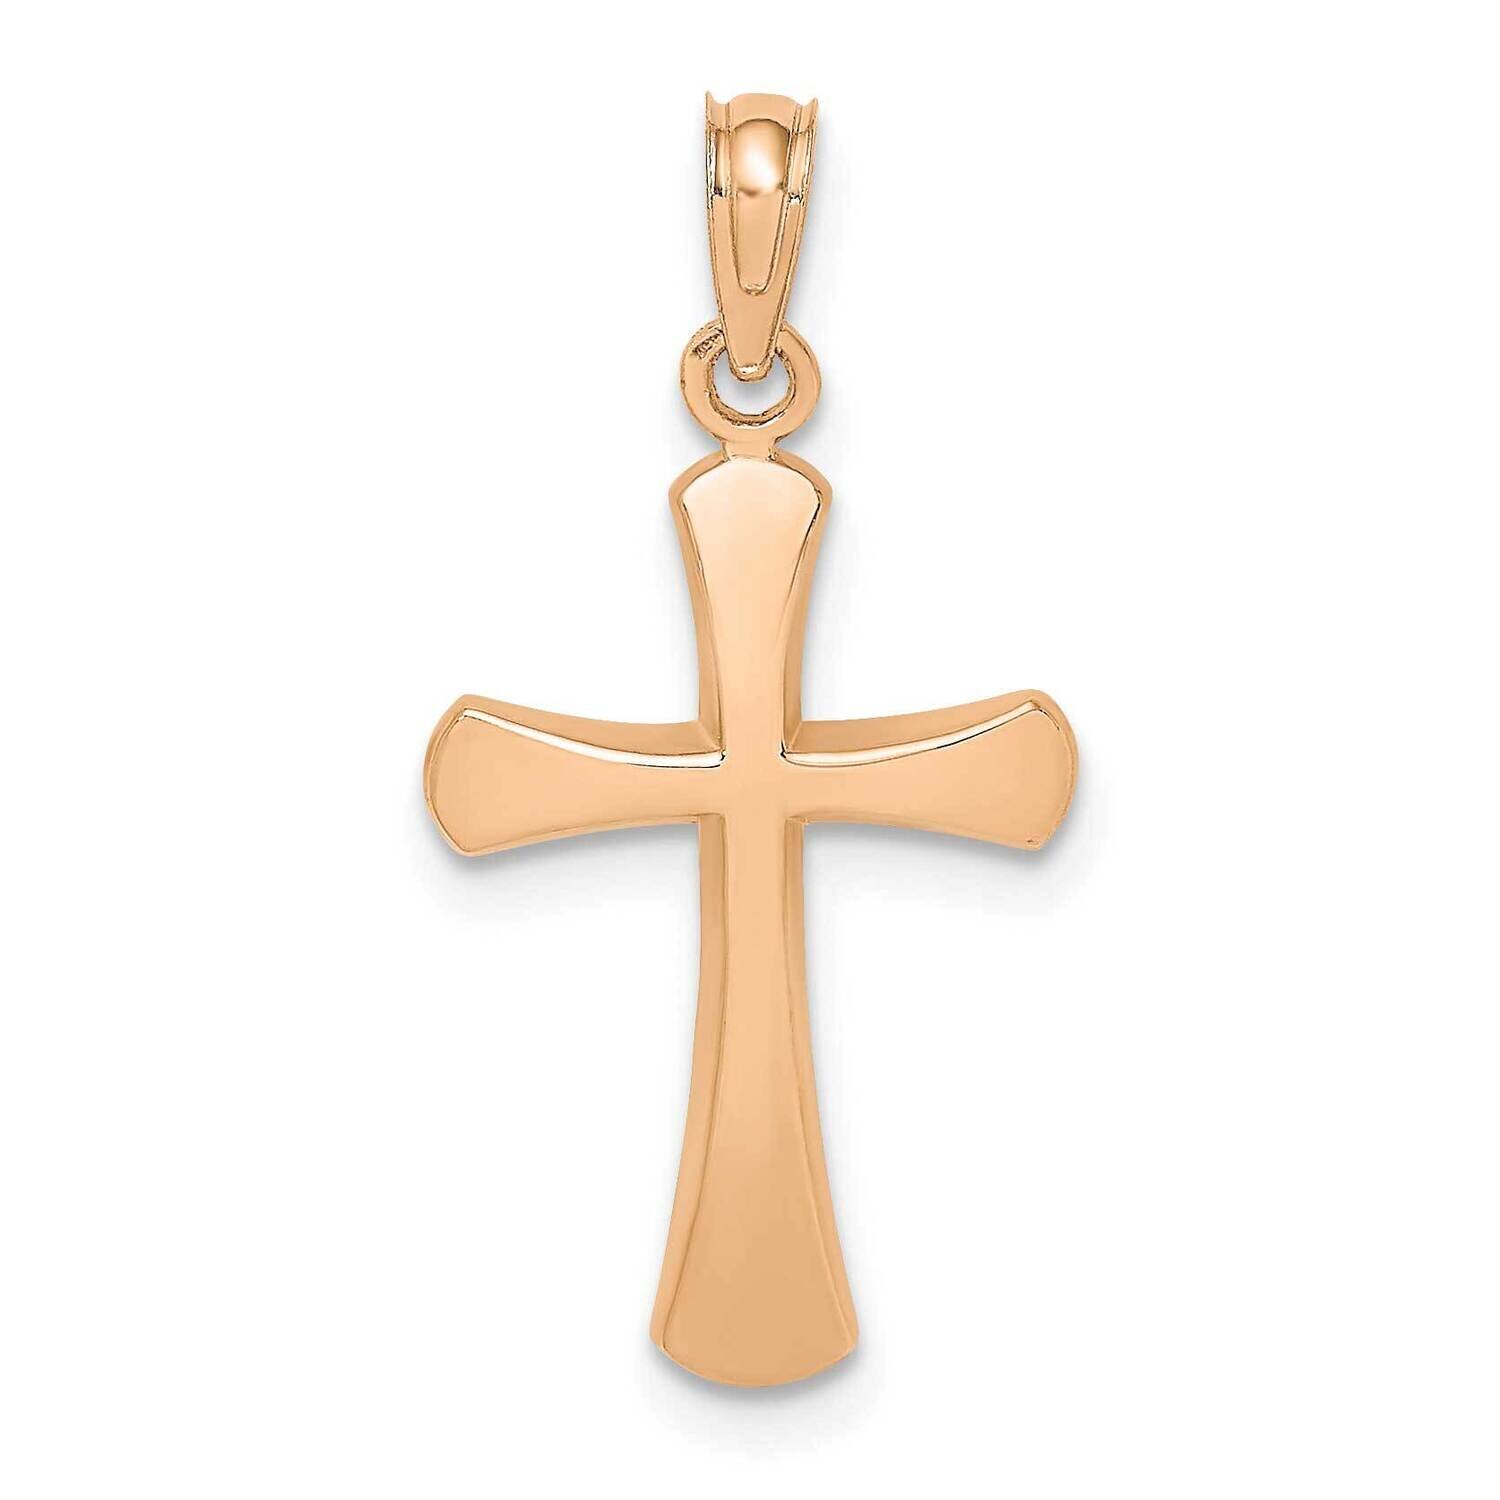 Polished Beveled Cross with Round Tips Charm 10k Rose Gold 10K8523R